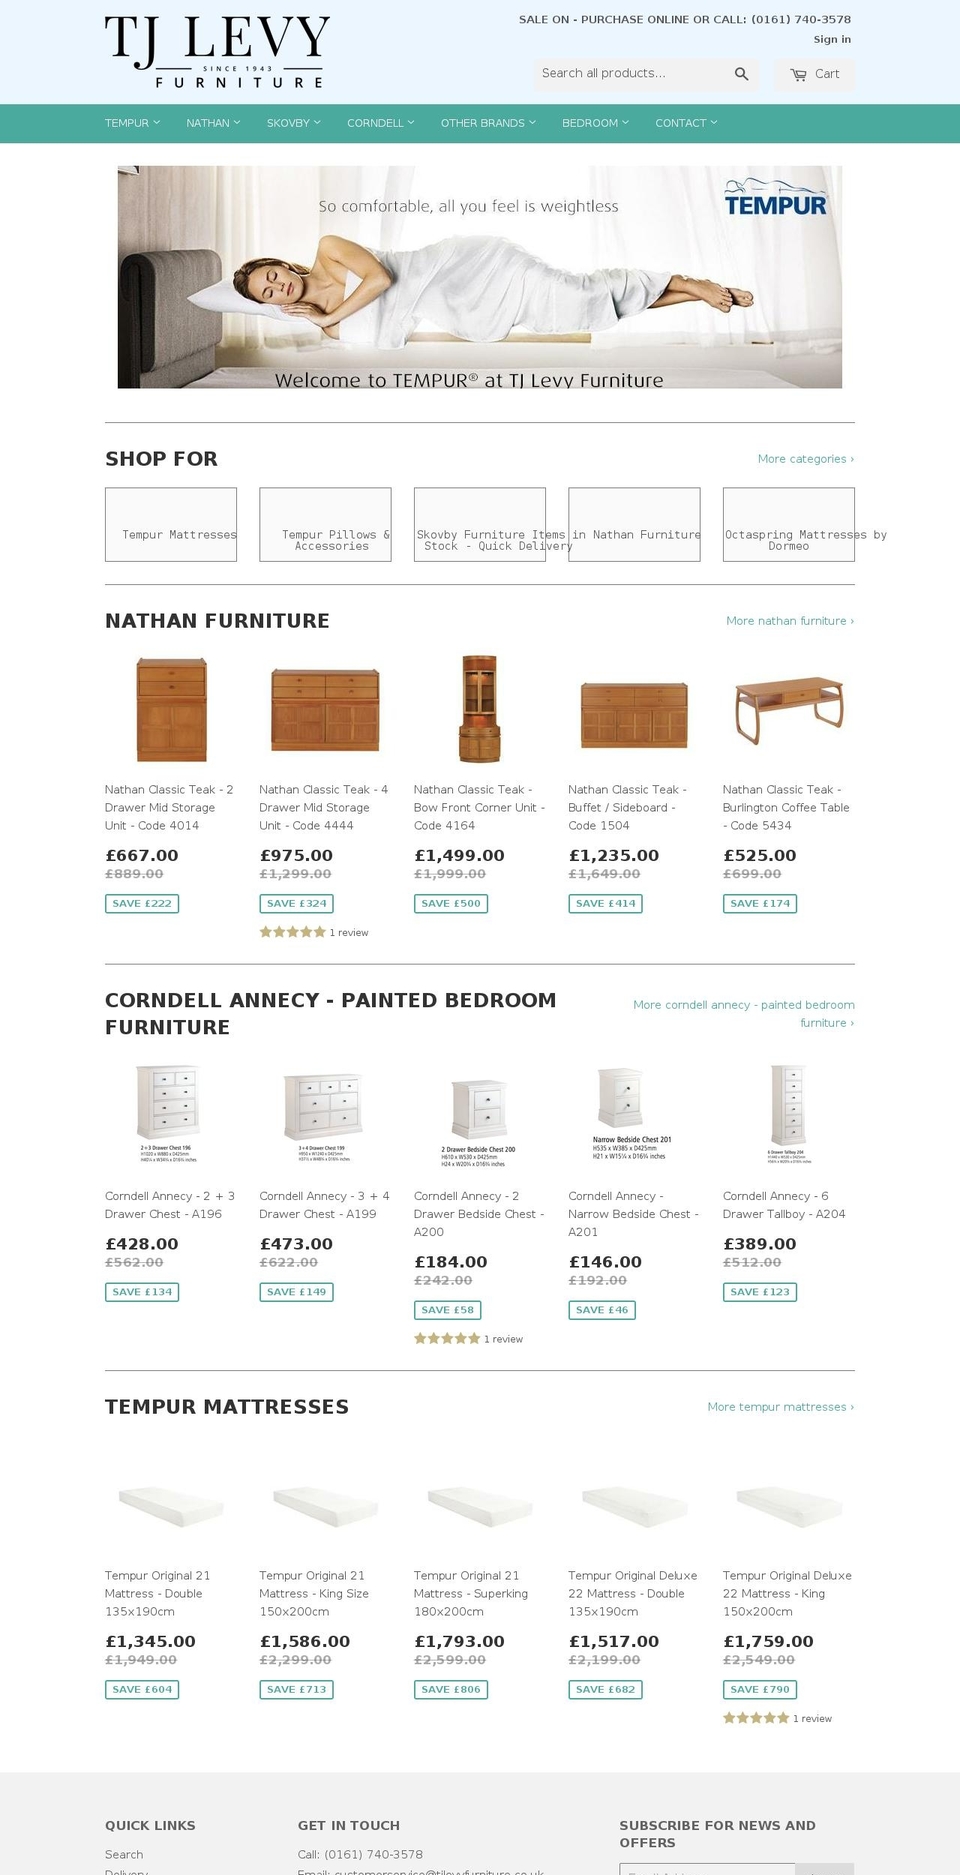 T\u0026J Levy Furniture Shopify theme site example tjlevy.com